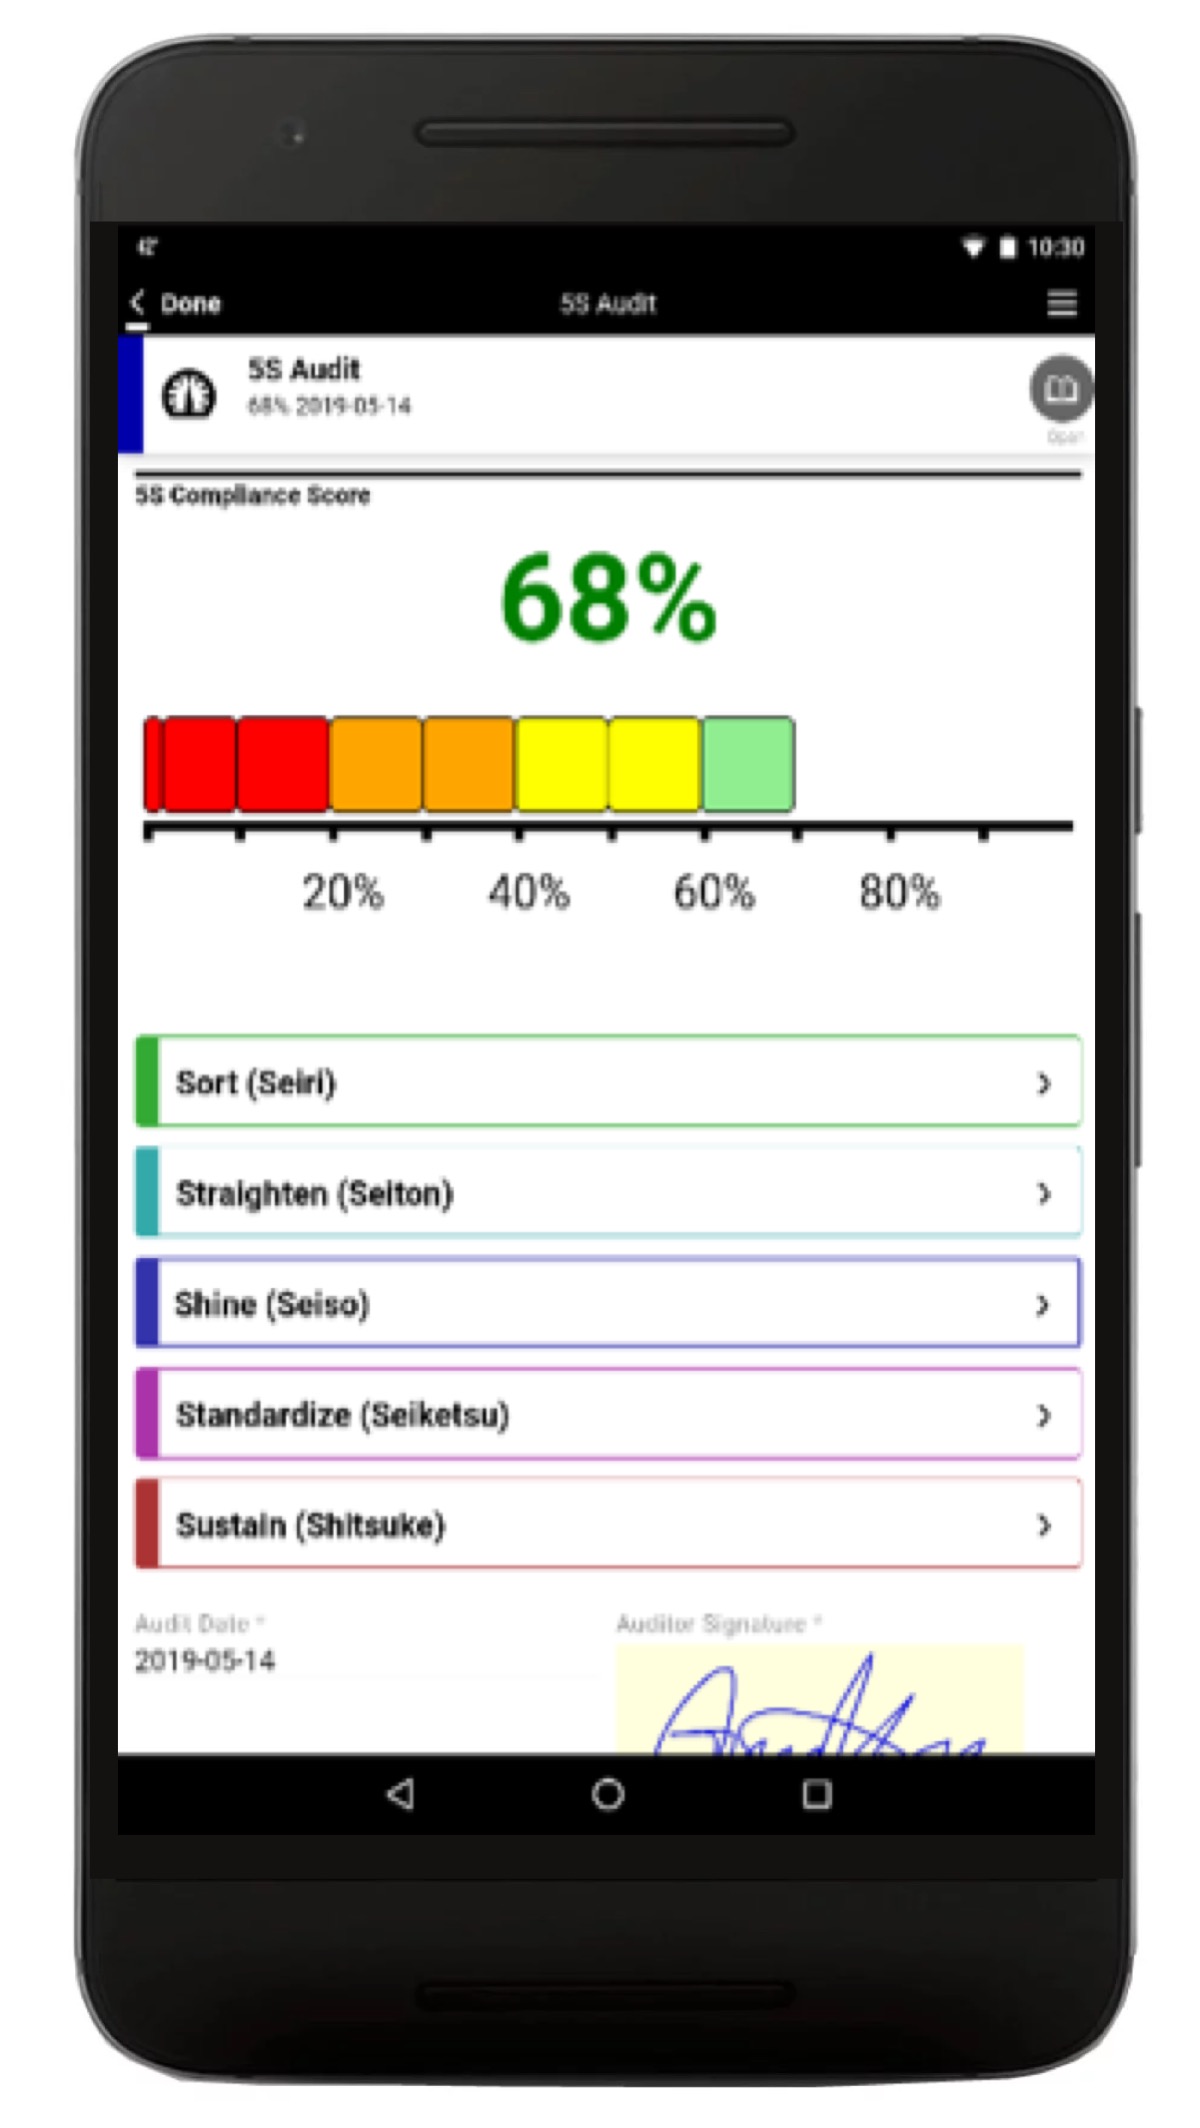 5S Audit Checklists: A Free App to Go Digital